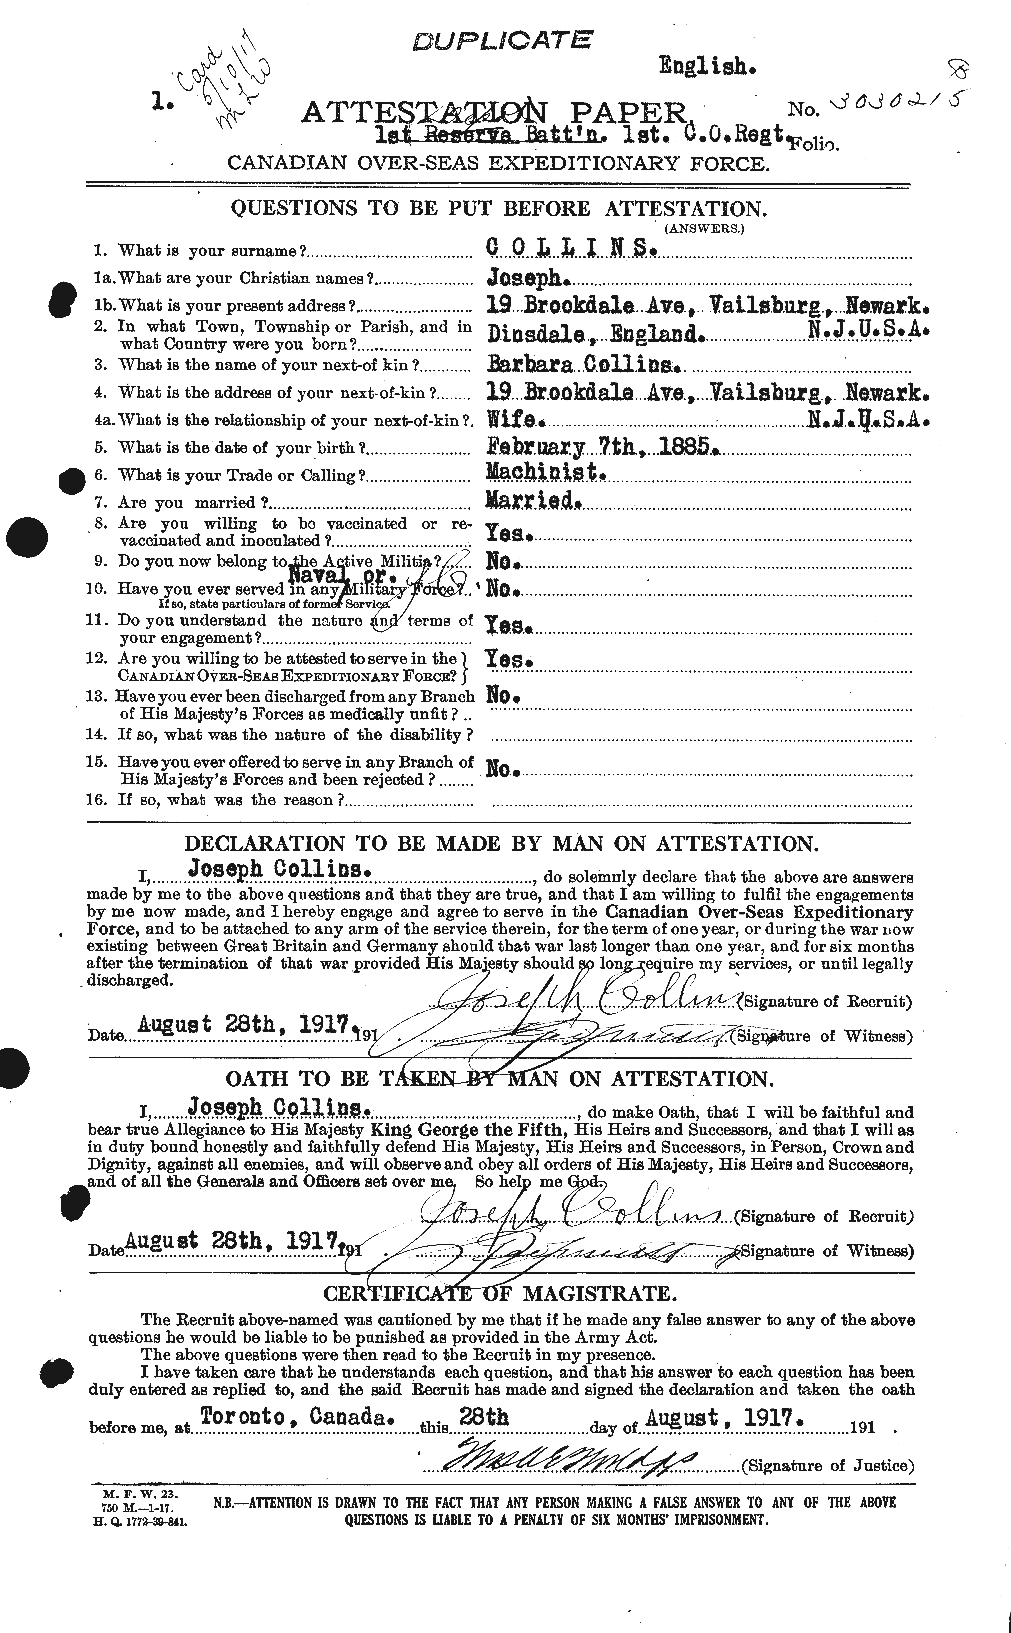 Personnel Records of the First World War - CEF 069525a